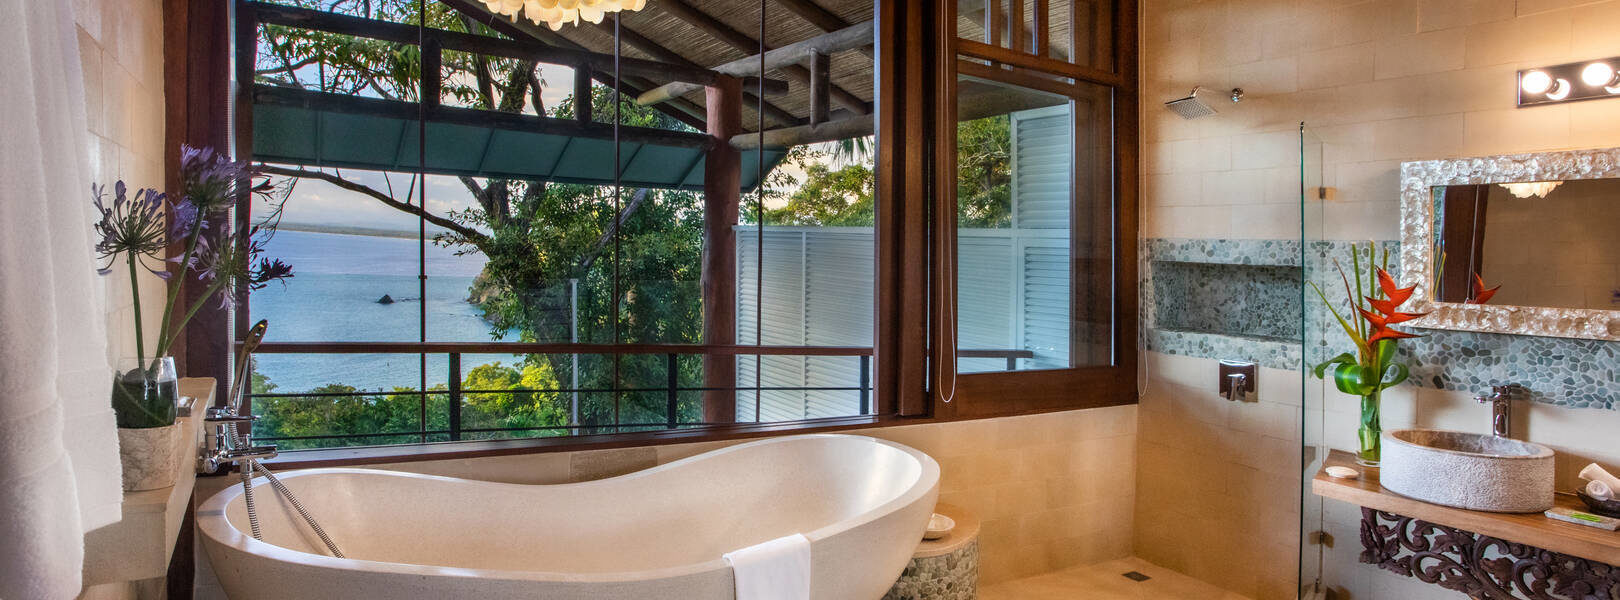 Luxury and opulence is found throughout the villa even in the bathrooms.